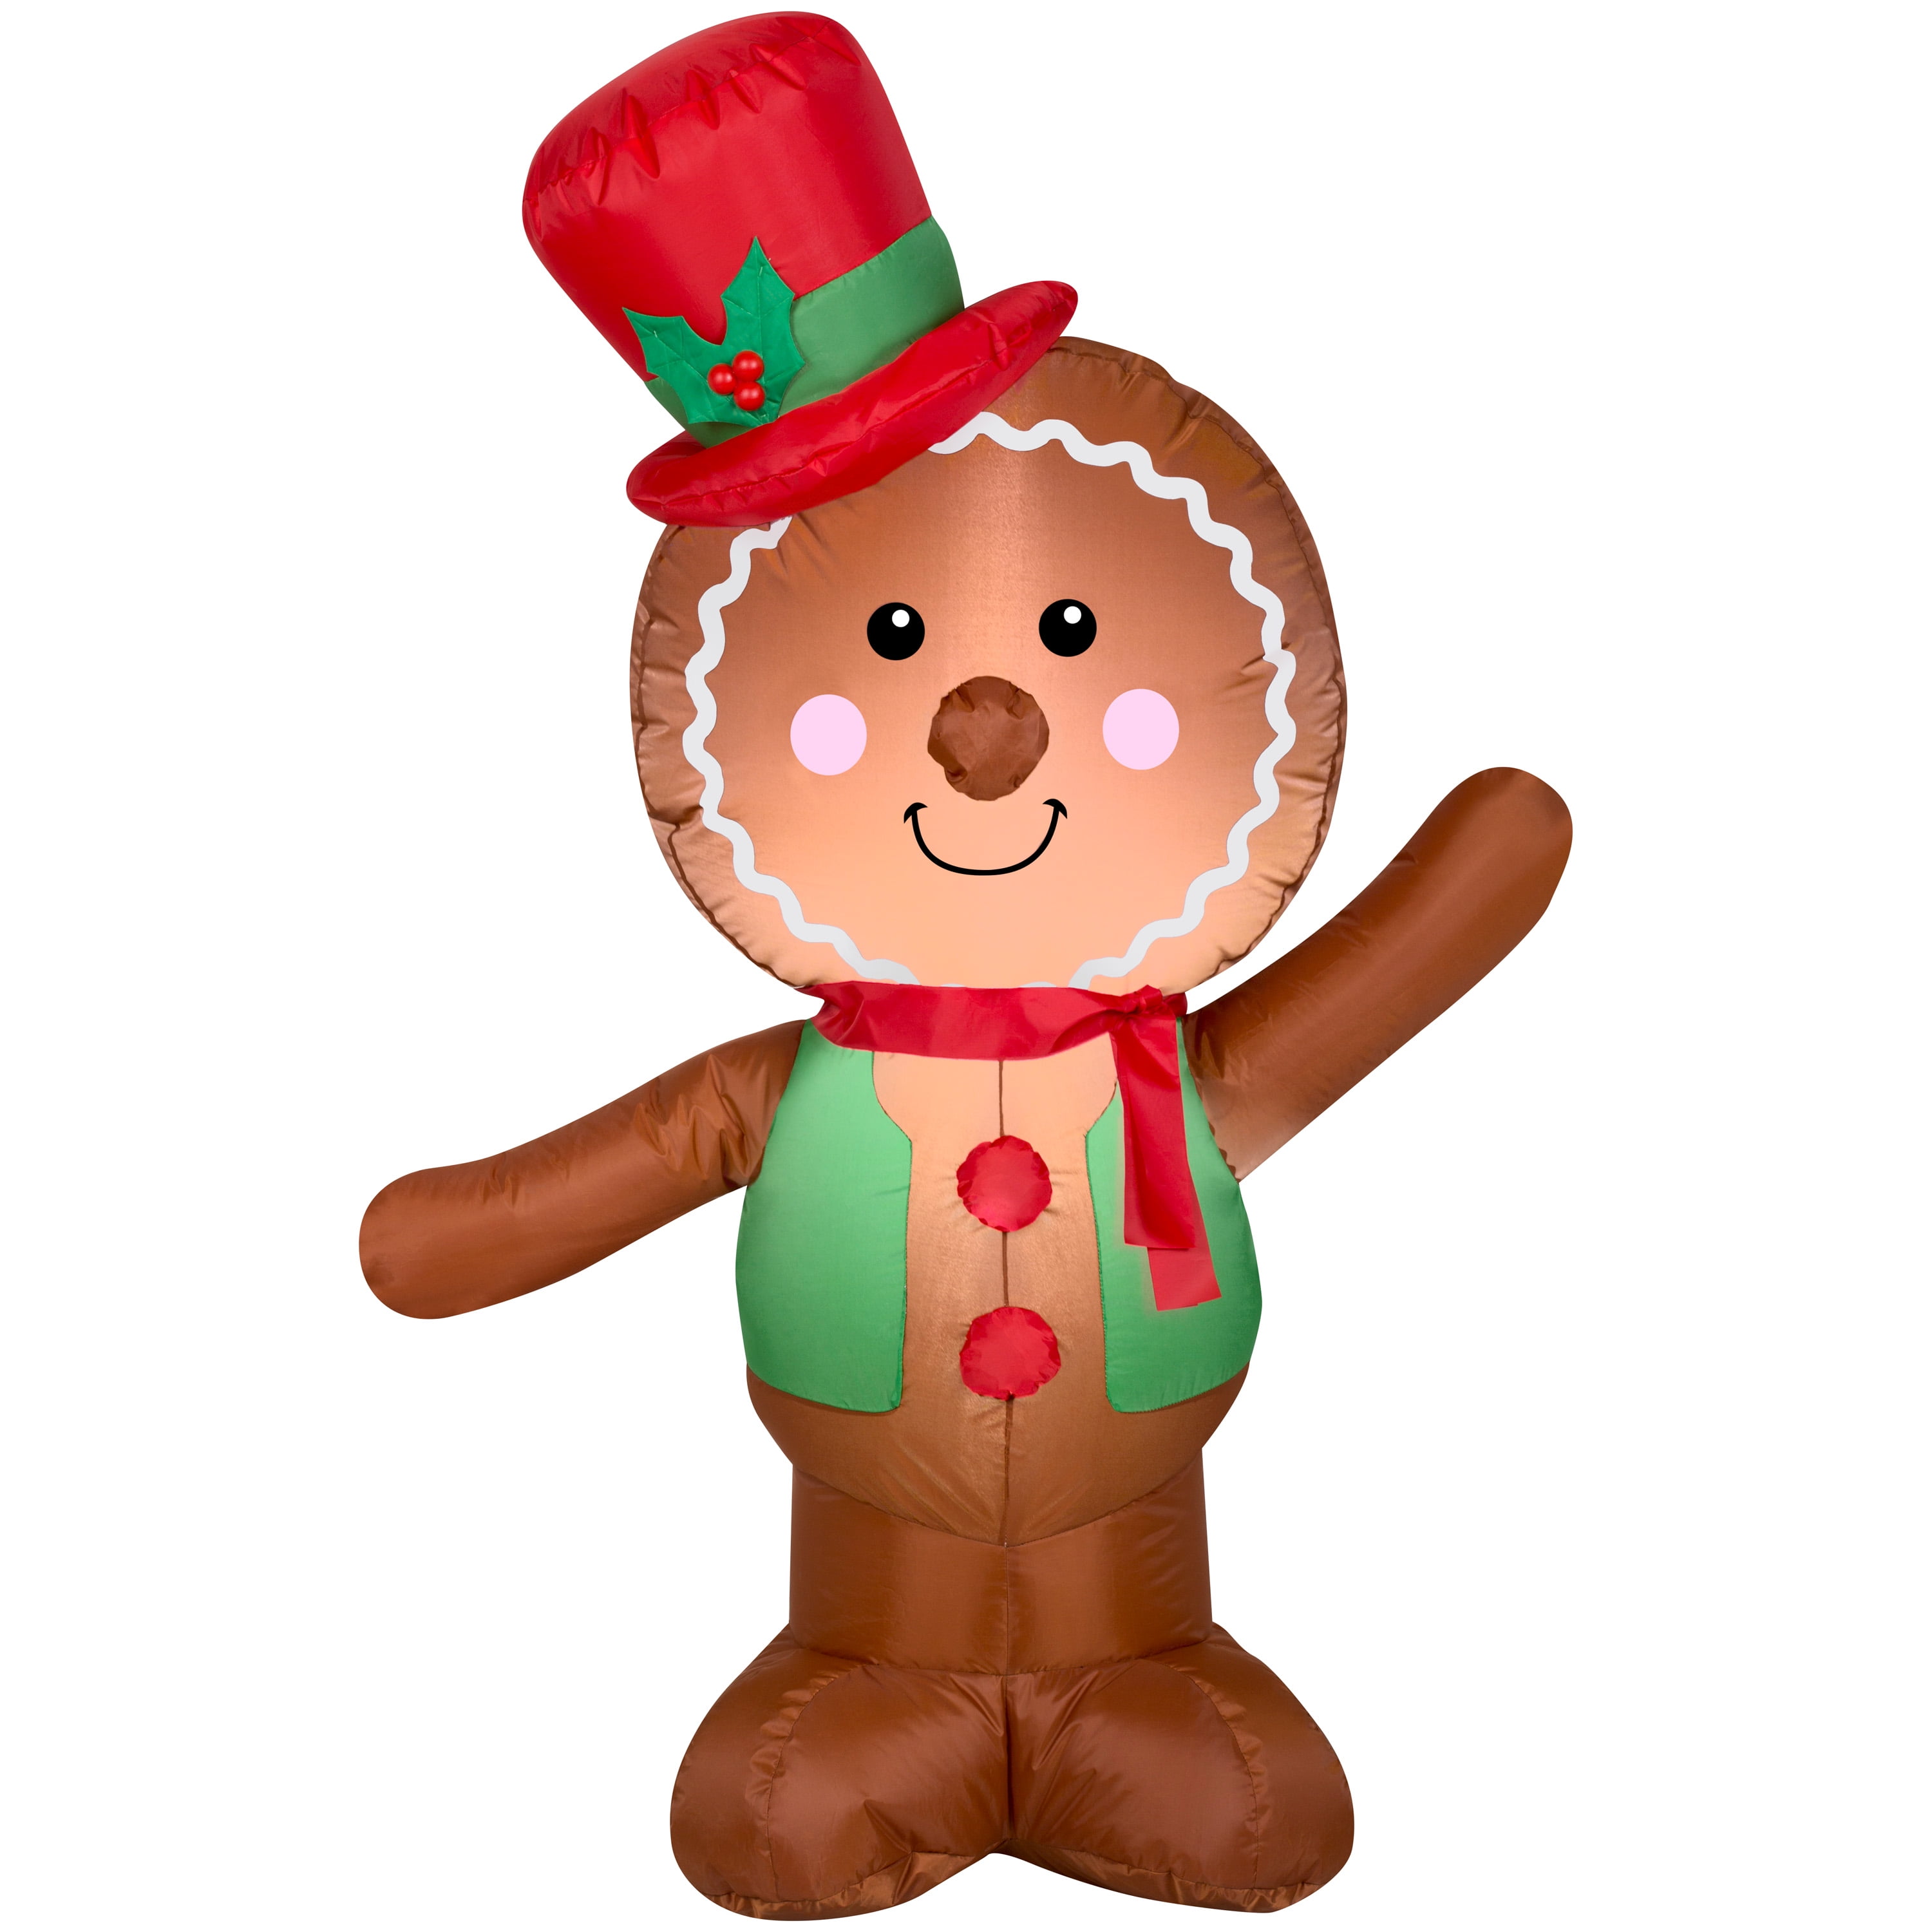 Gingerbread Man Inflatable Top Hat Christmas Decor Gemmy 4 FT 